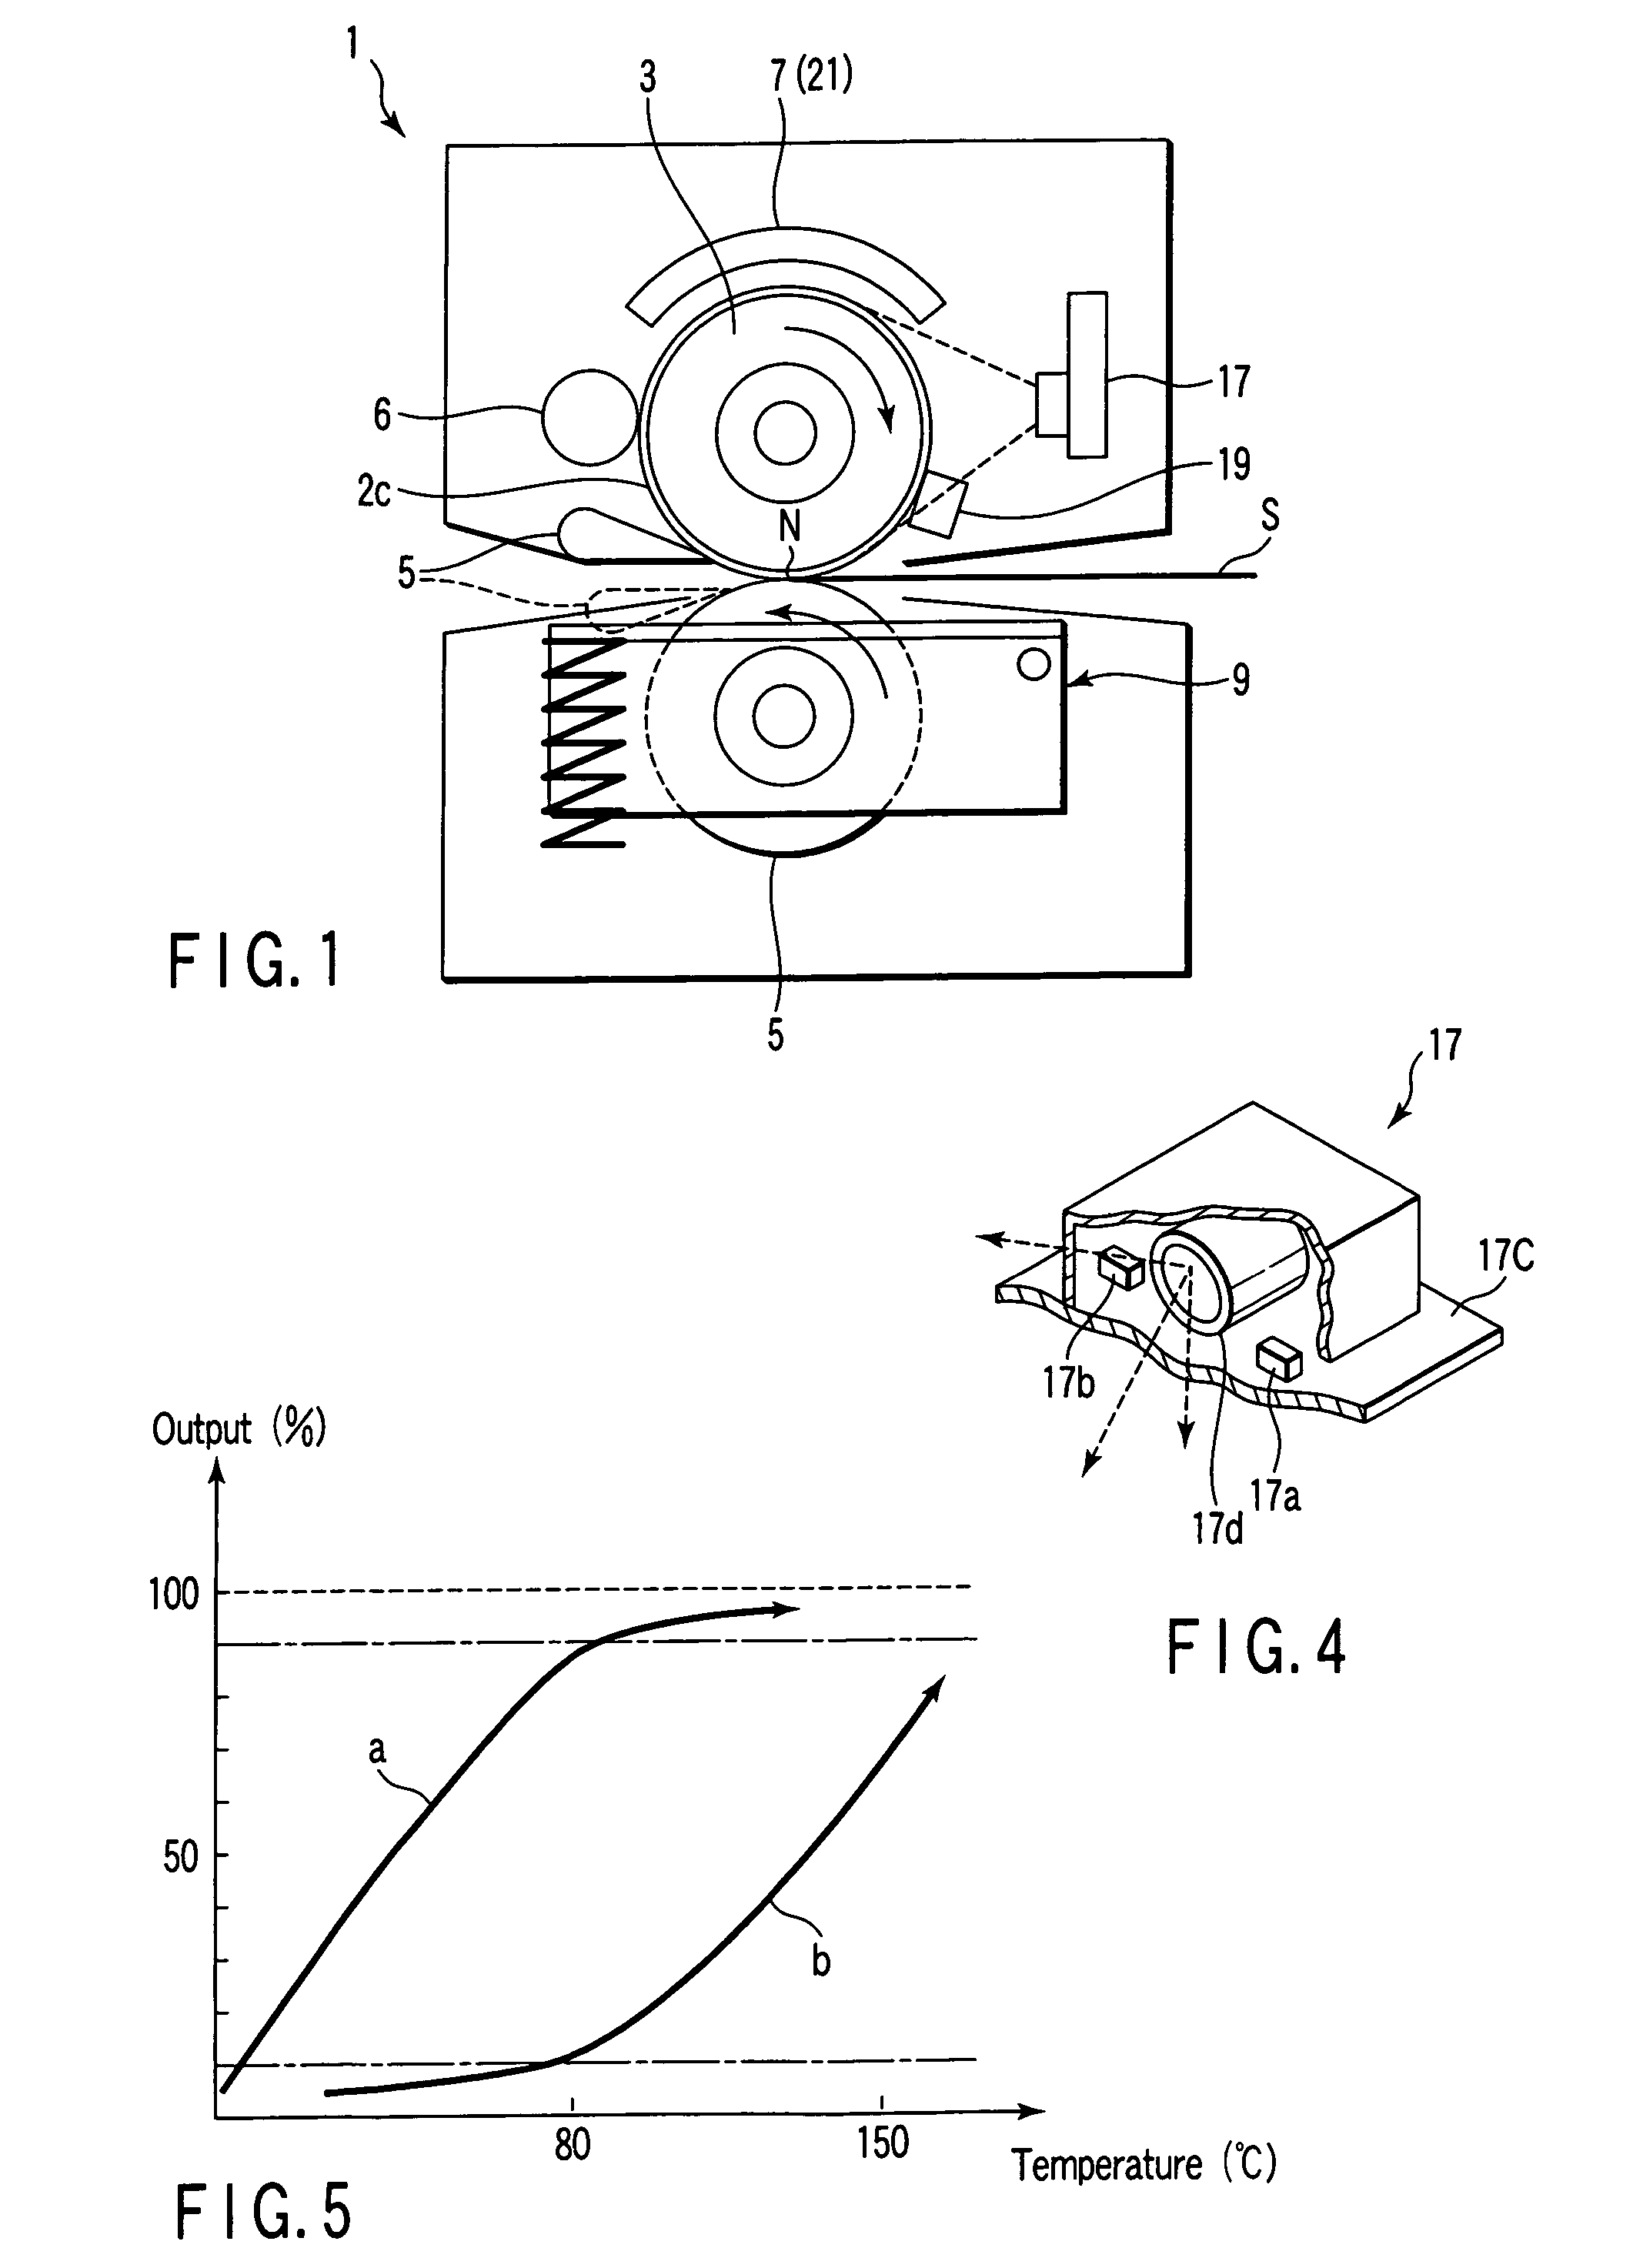 Apparatus for fixing toner on transferred material